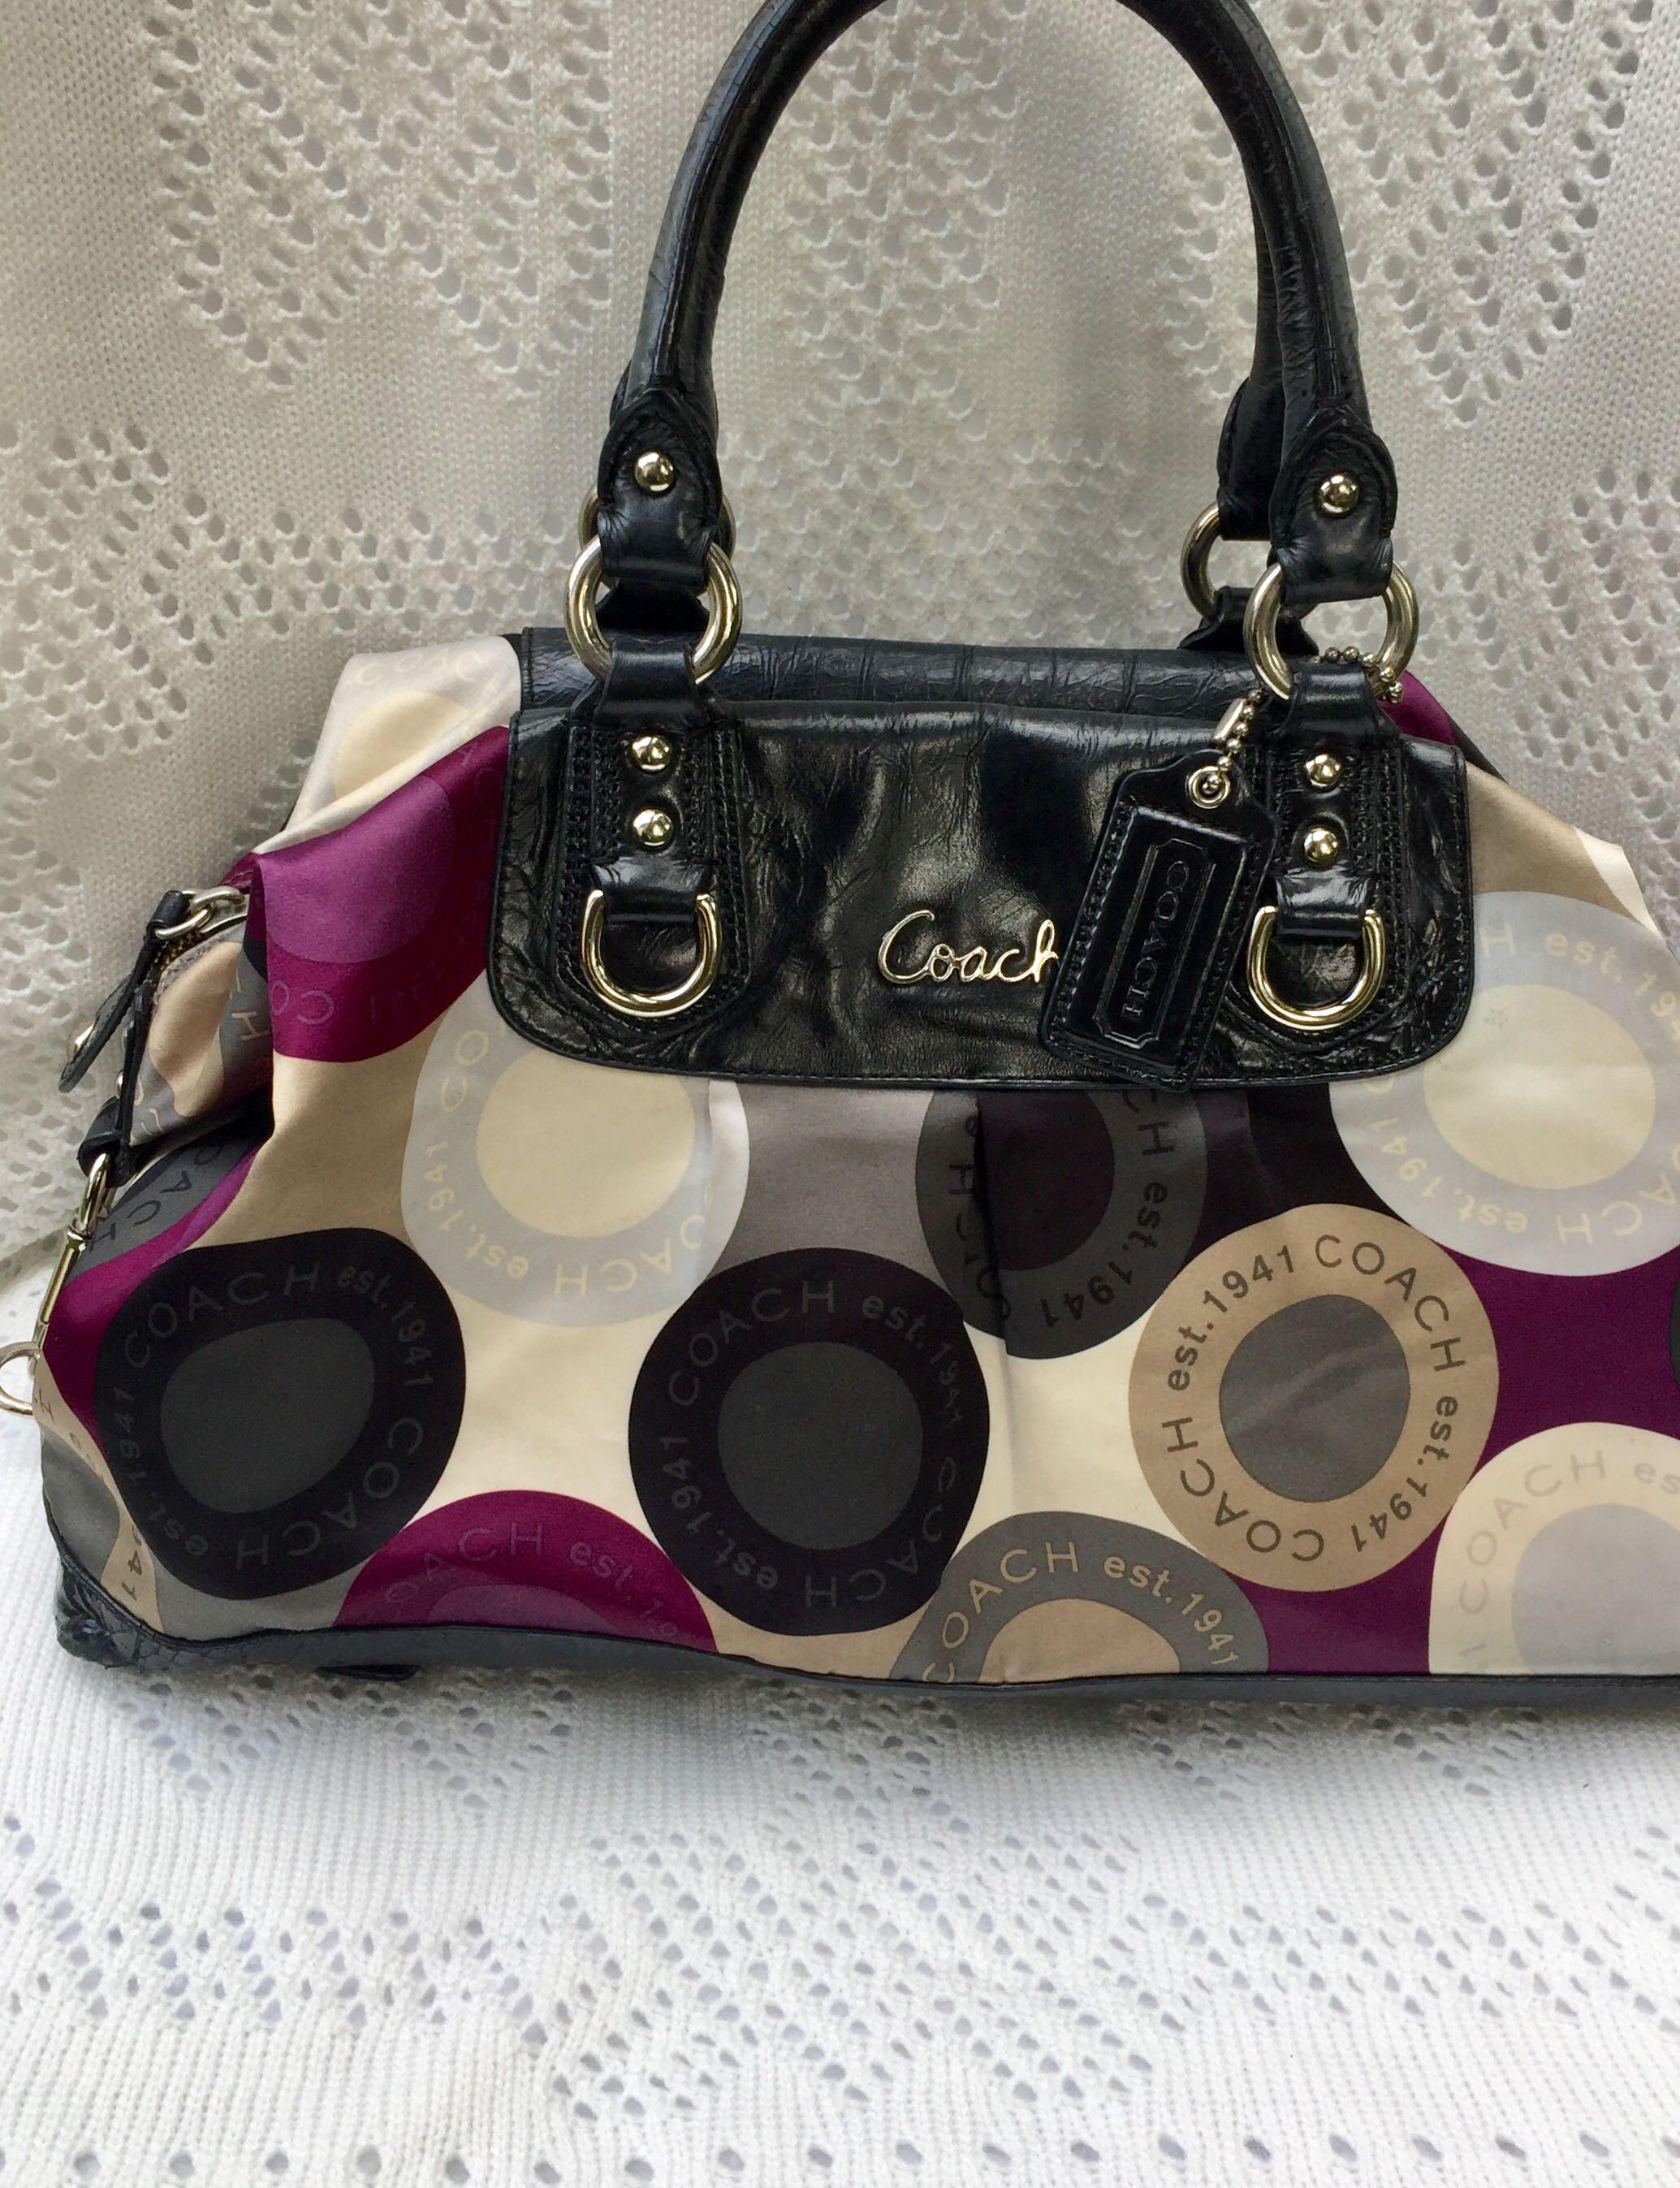 Vintage Coach Thrifted Purse | Gallery posted by Taylor Jenkins | Lemon8